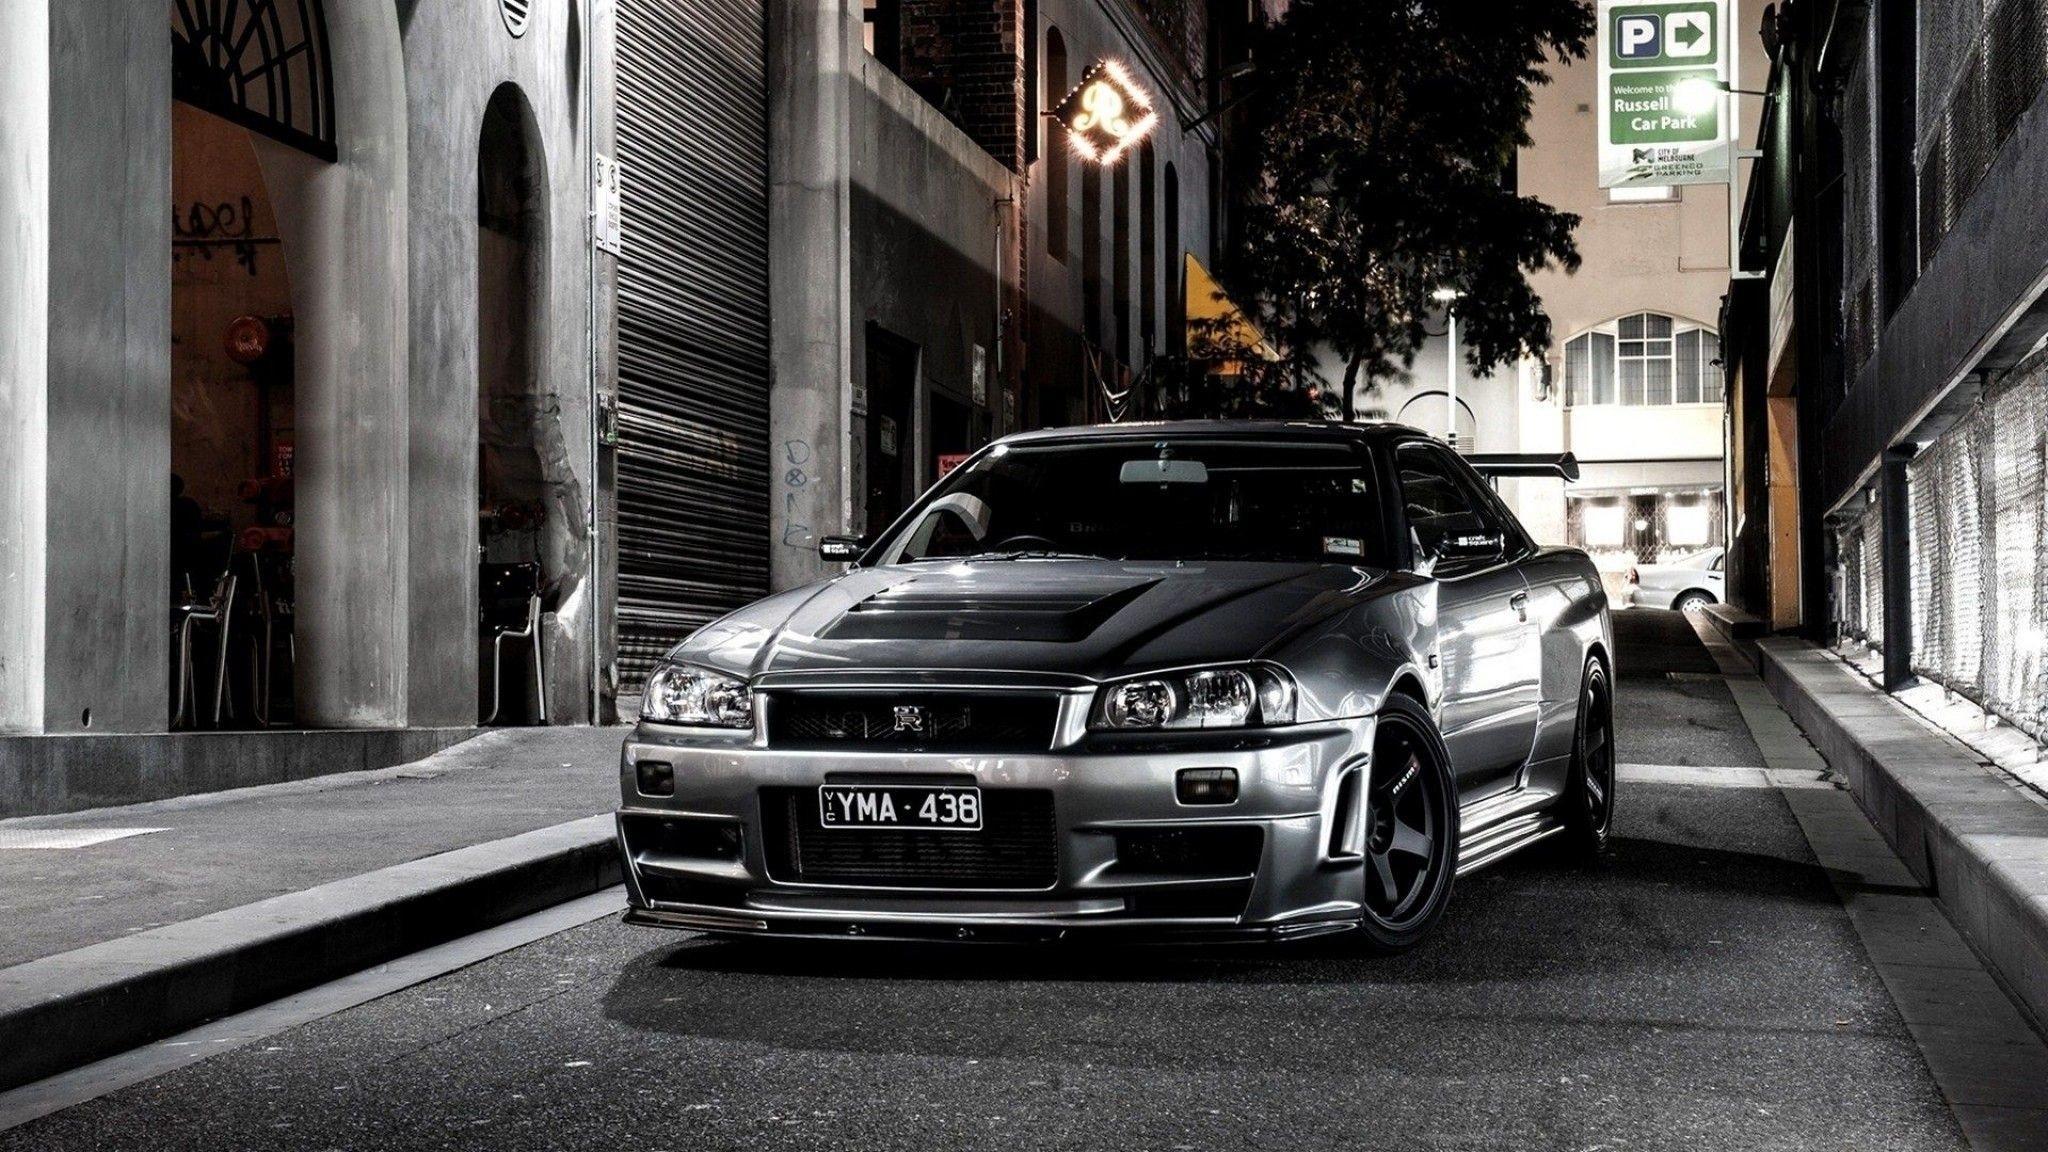 Nissan R34 Wallpapers Top Free Nissan R34 Backgrounds Wallpaperaccess